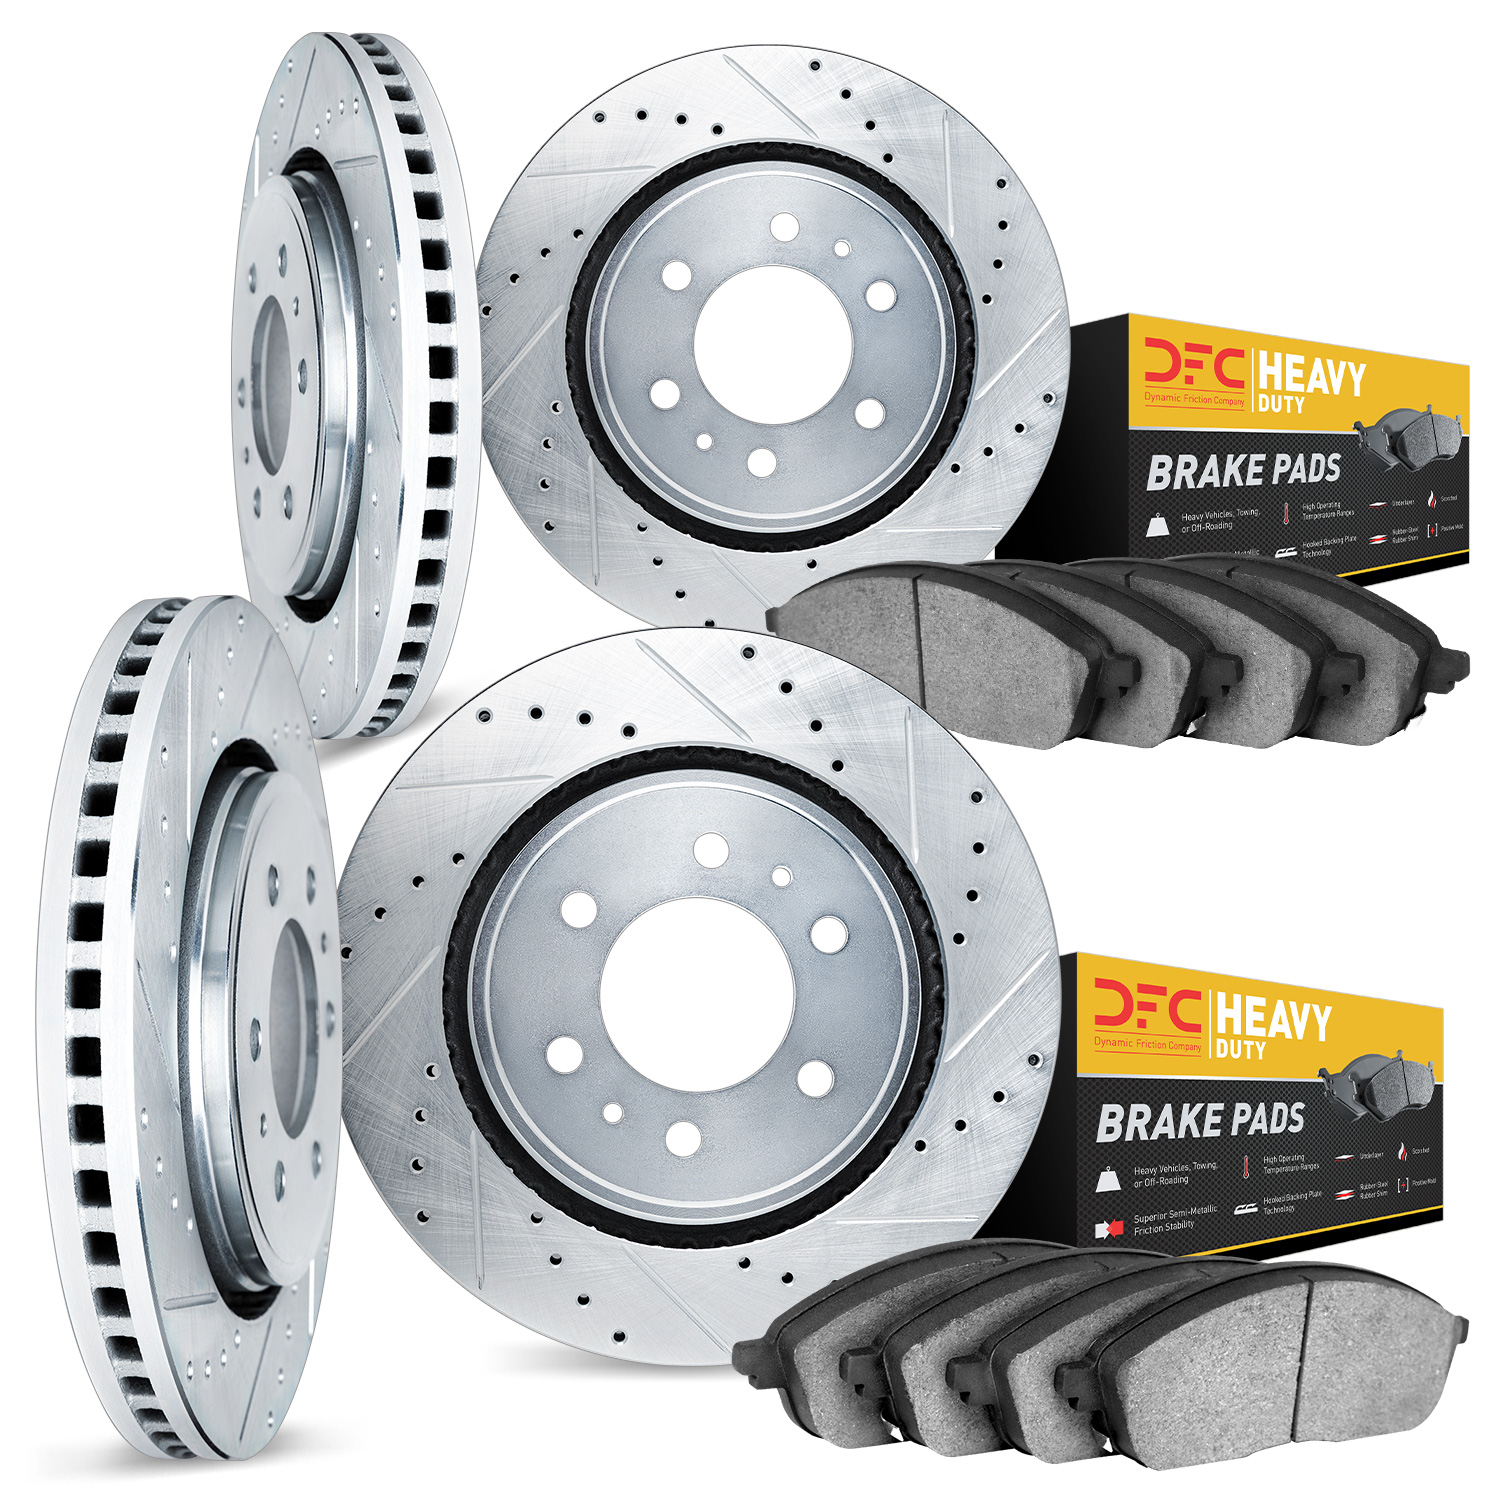 7204-48113 Drilled/Slotted Rotors w/Heavy-Duty Brake Pads Kit [Silver], 2009-2014 GM, Position: Front and Rear